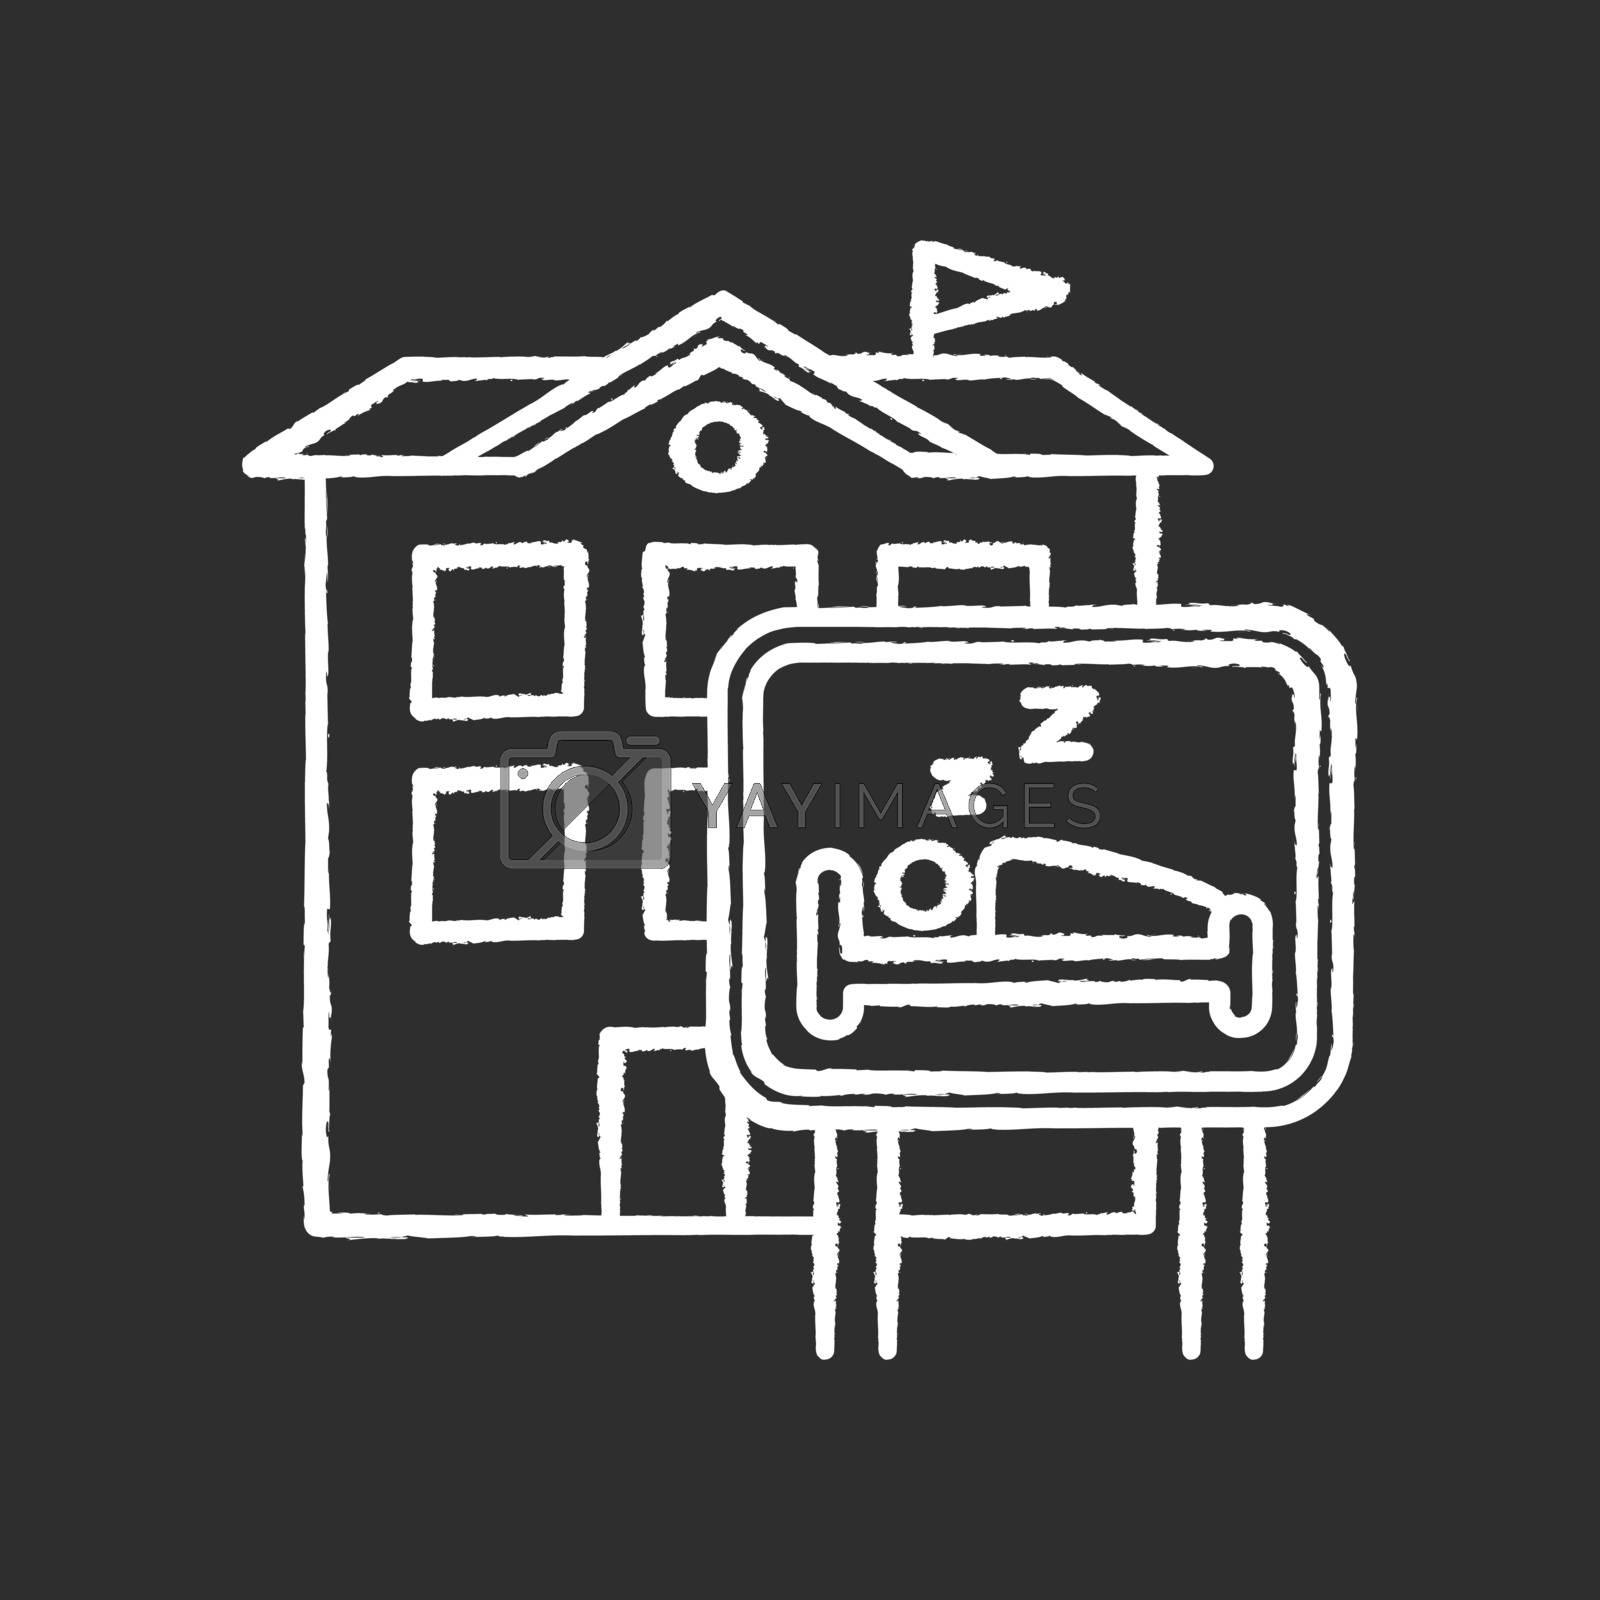 Royalty free image of Hotel chalk white icon on black background. Hostel. Motel building. Sleeping accommodation services. Travelling facilities. Residential area. Apartment block. Isolated vector chalkboard illustration by bsd